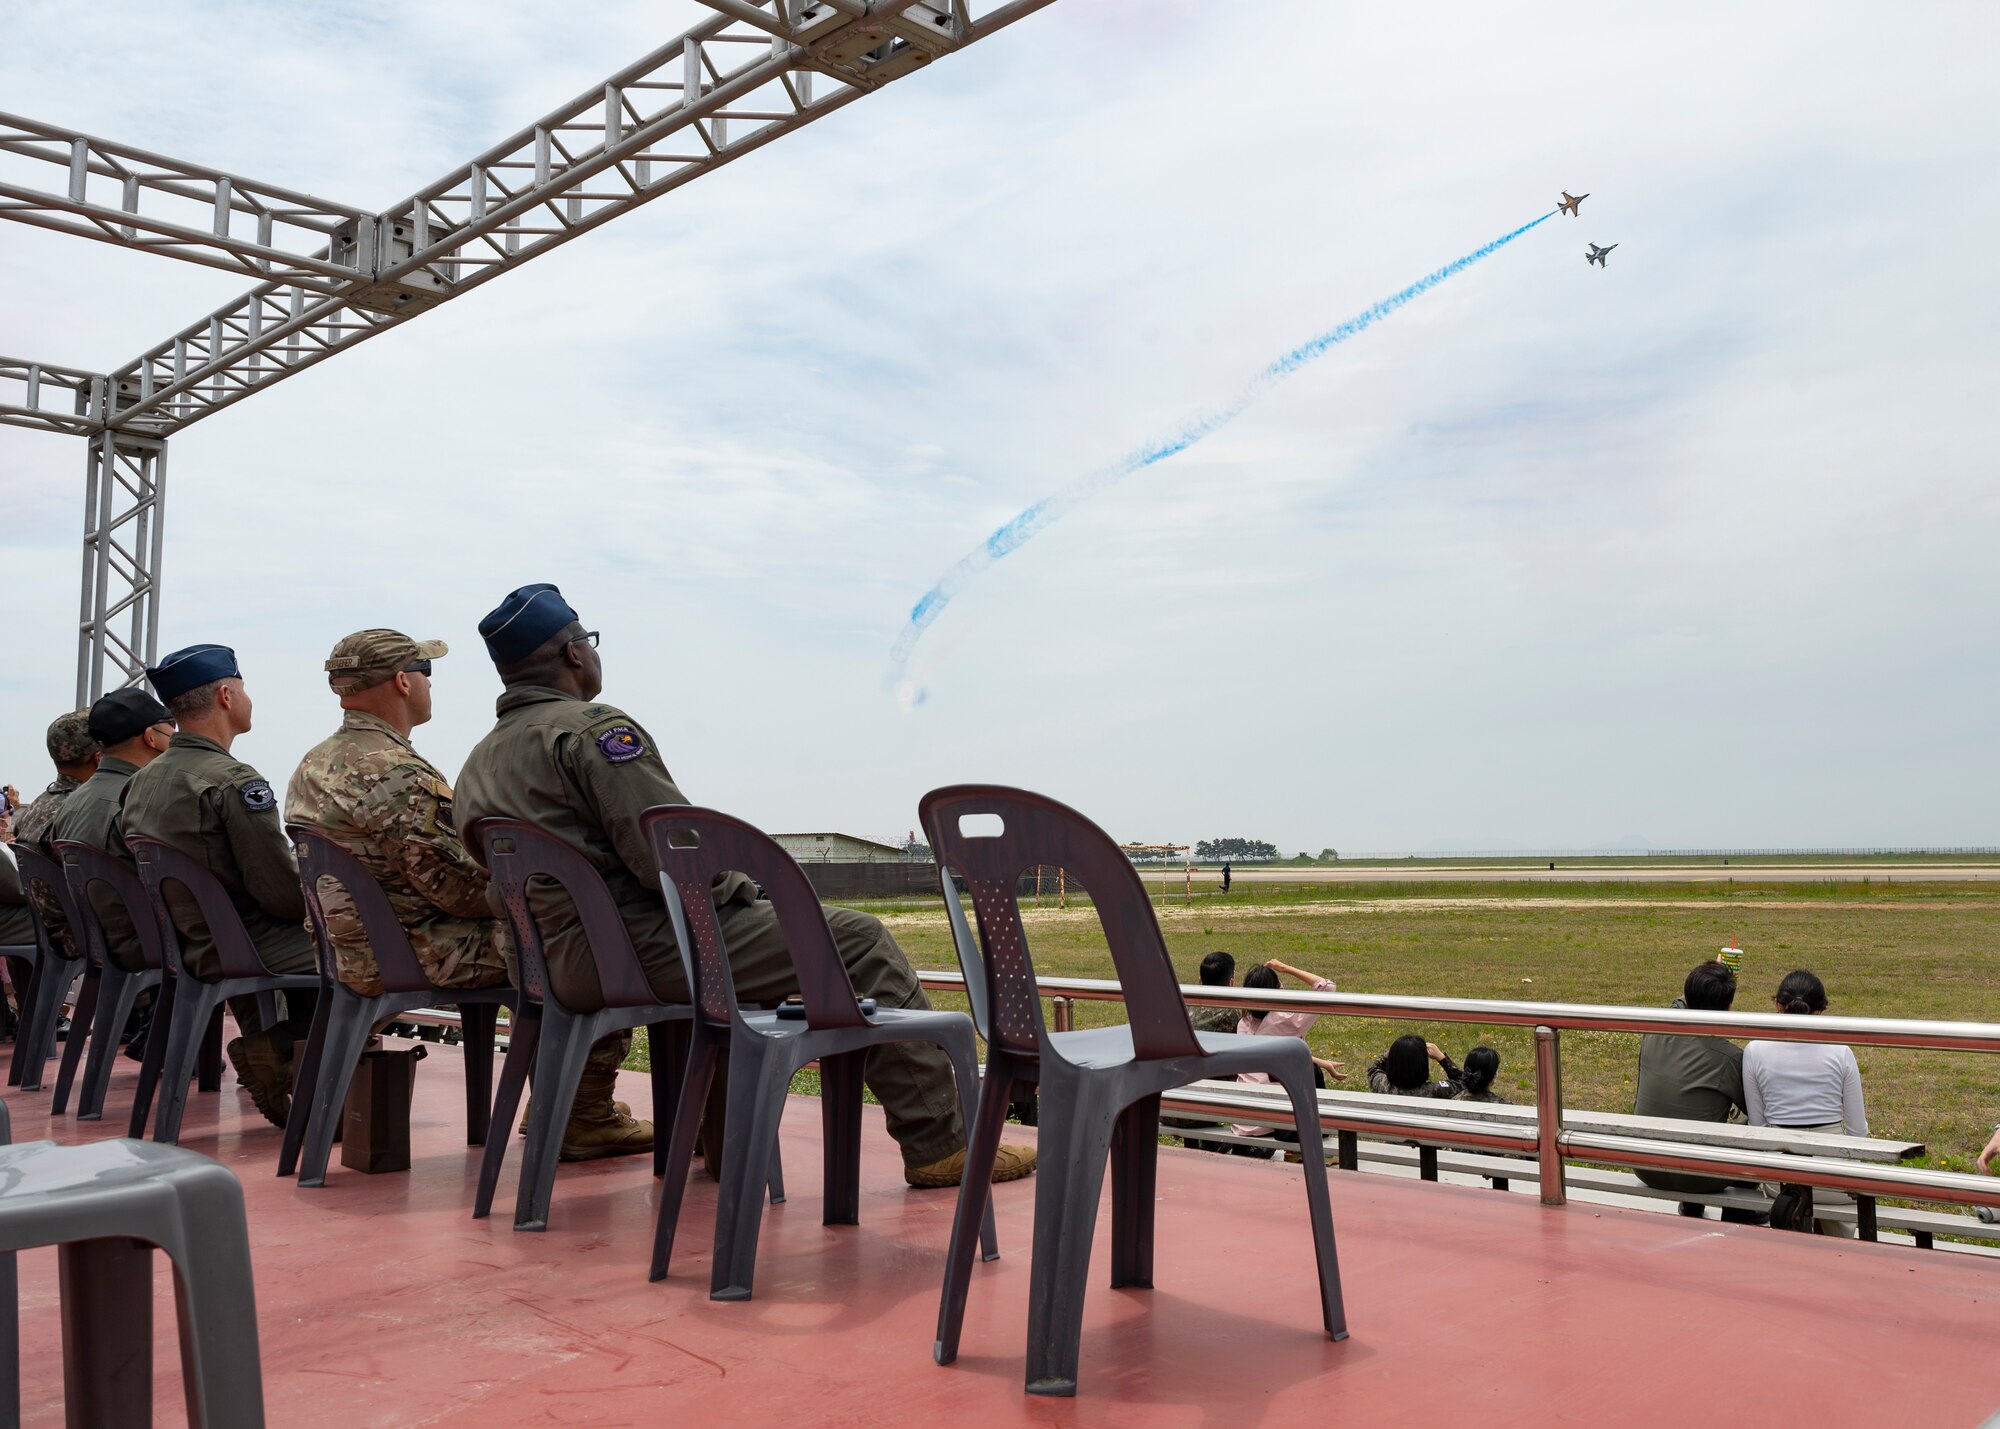 8th Fighter Wing leadership watch the Black Eagle jets perform air tricks.